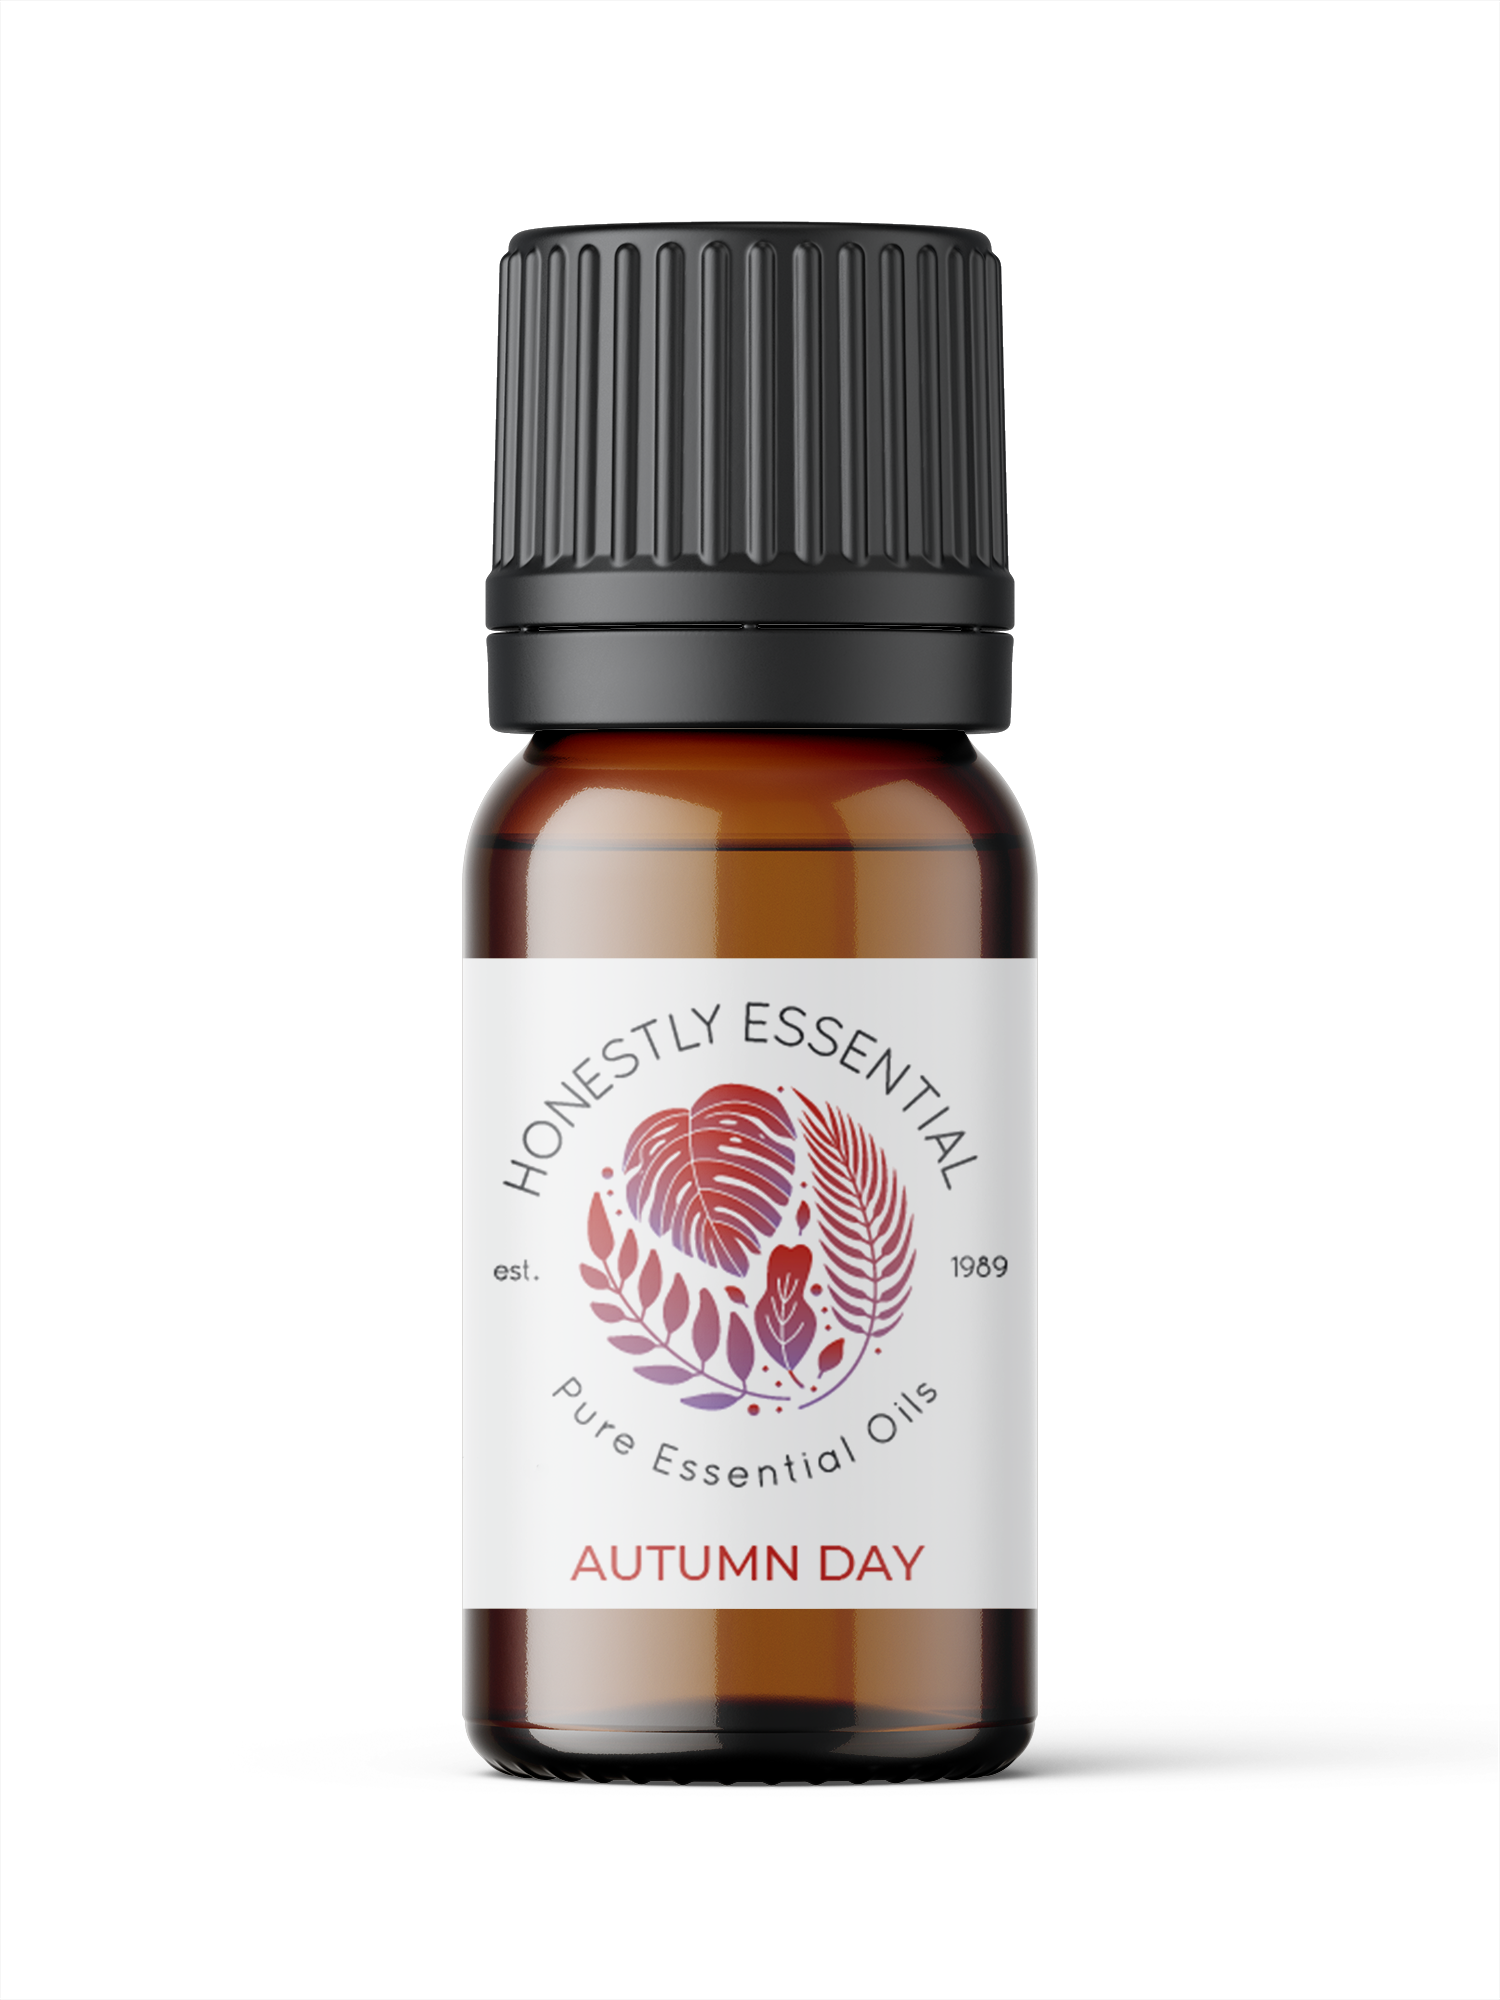 Autumn Day - Synergistic Blends | Honestly Essential Oils autumn, blend, cinnamon, day, fall, seasonal, spice